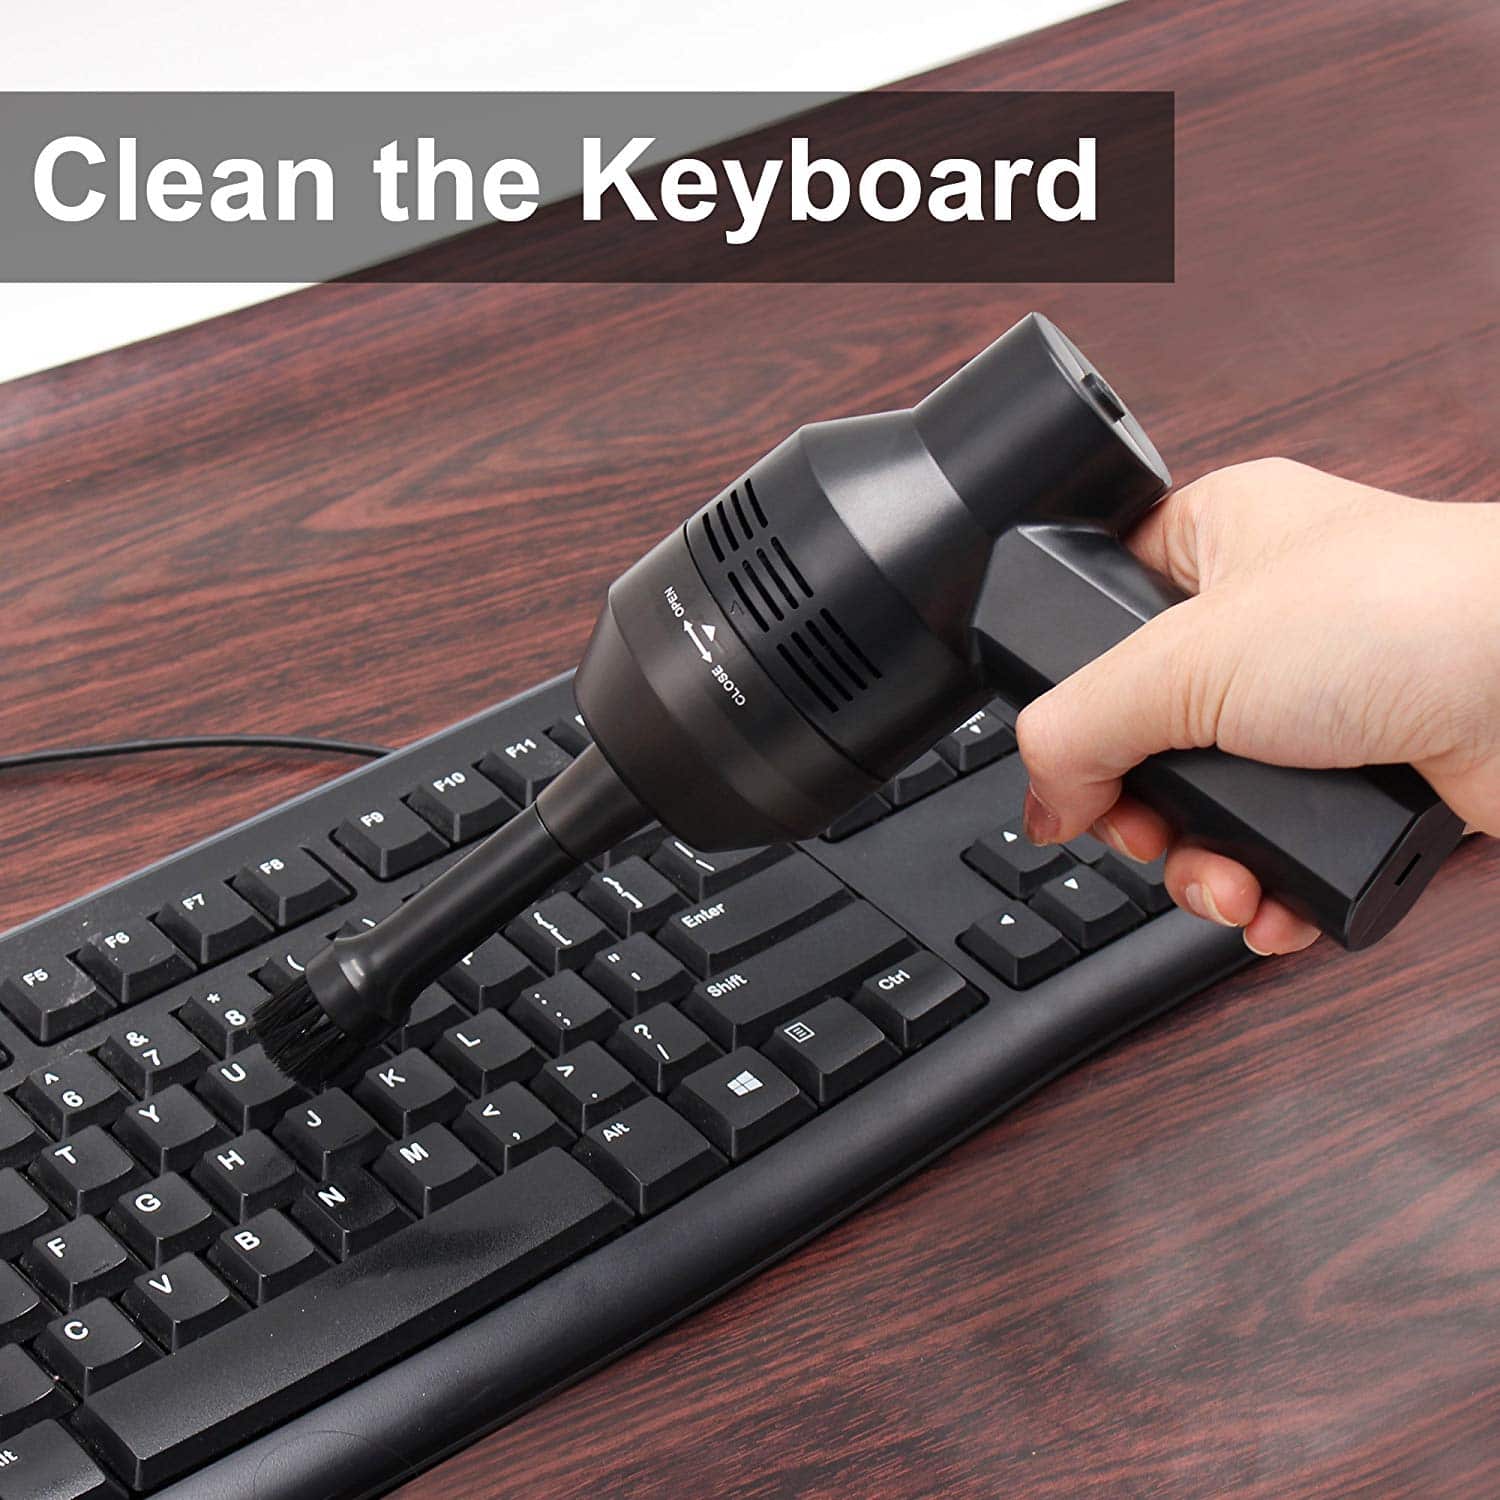 3m cl680 screen and keyboard cleaner